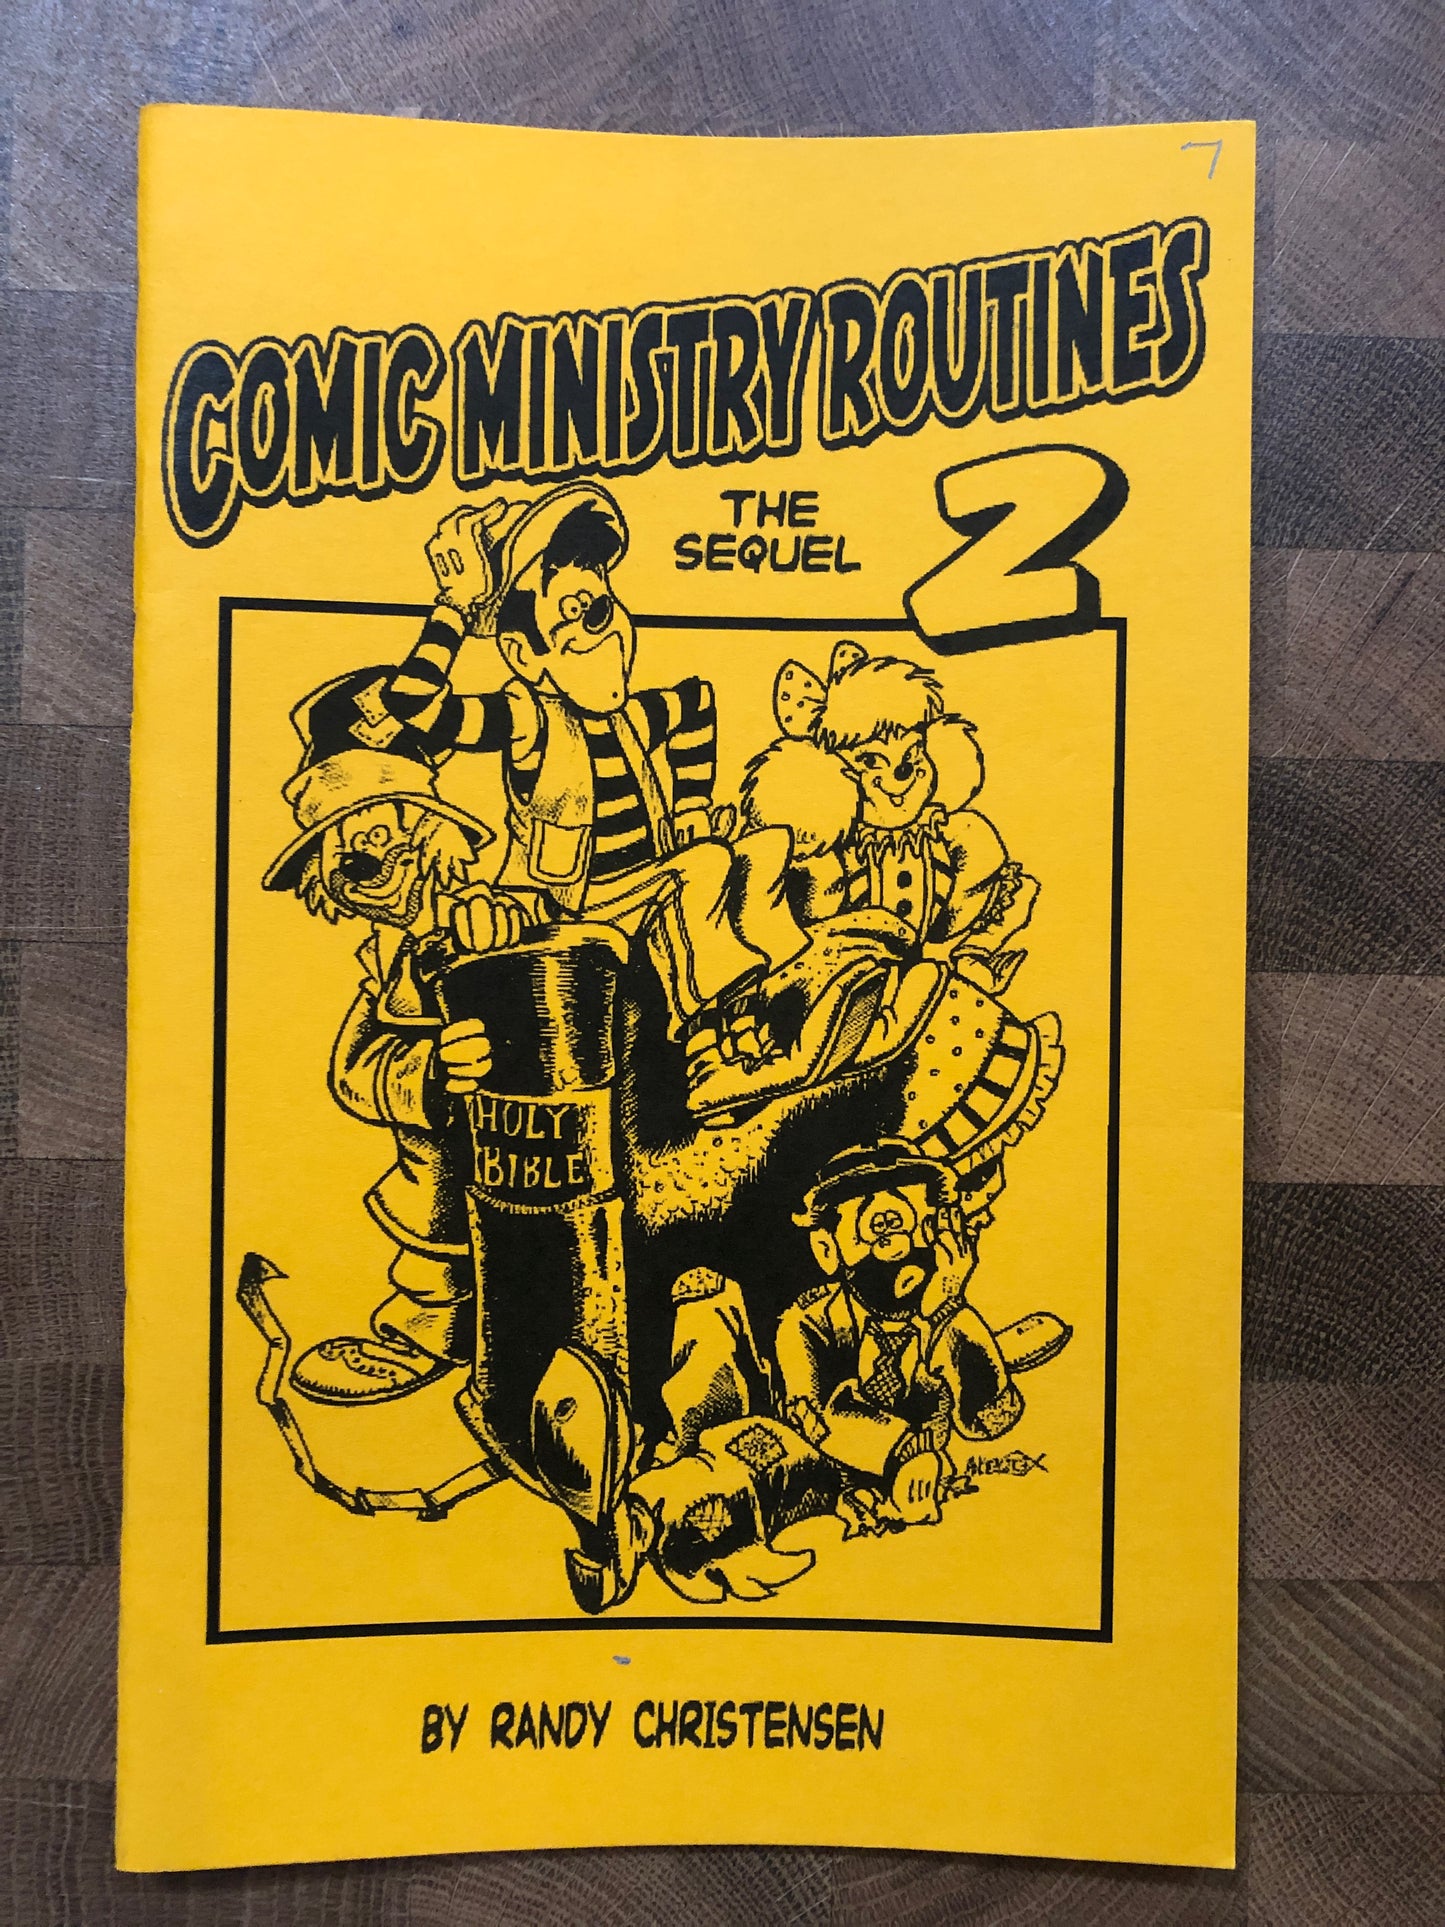 Comic Ministry Routines 2: The Sequel - Randy Christensen